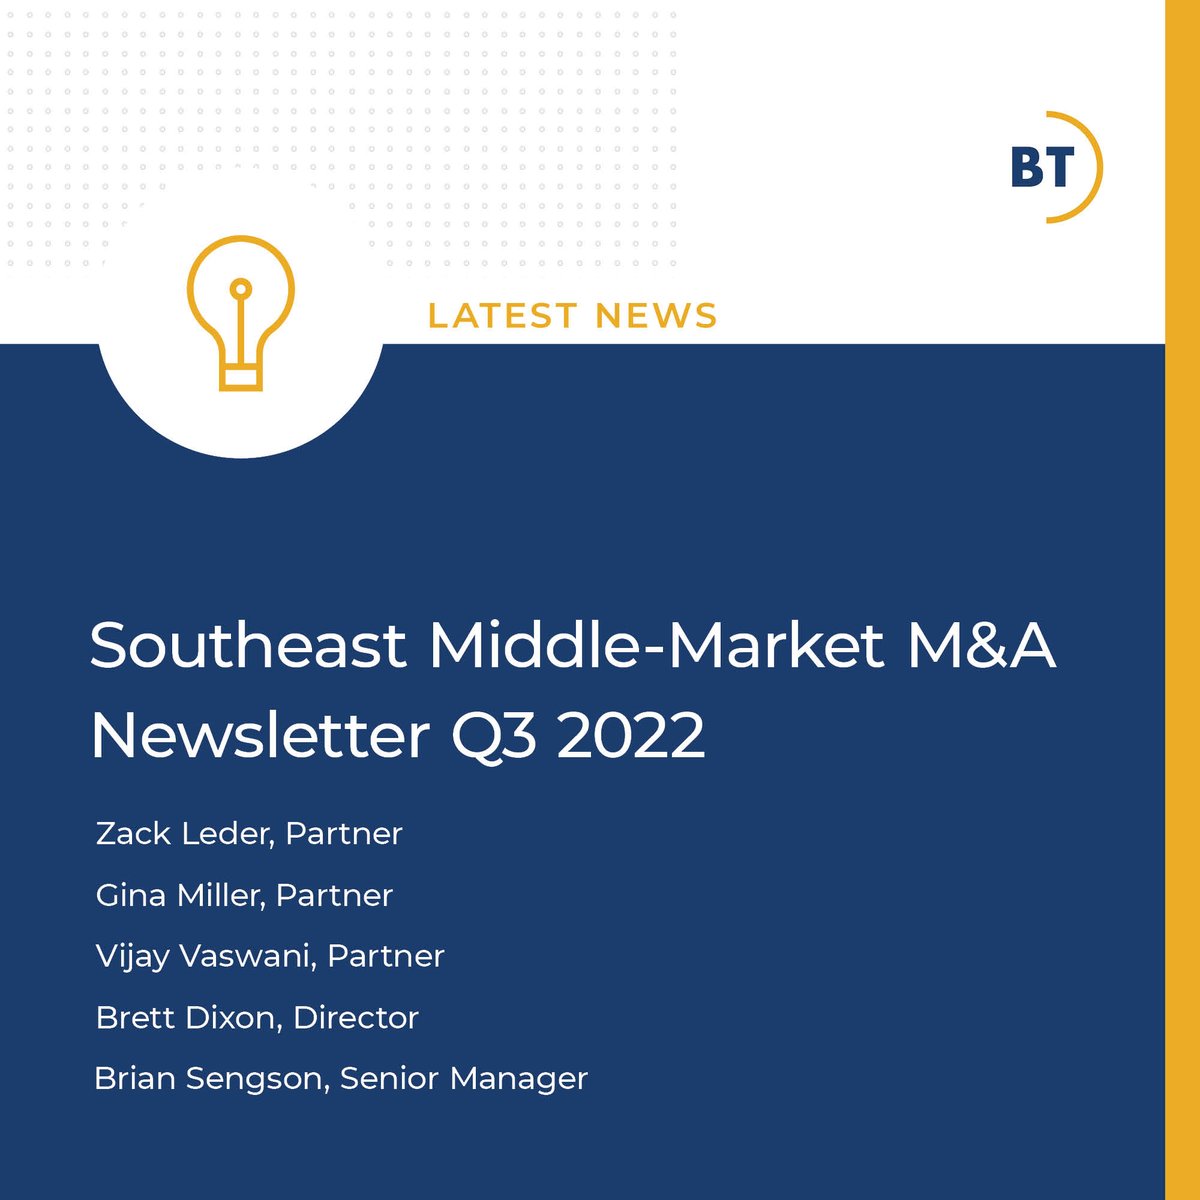 Bennett Thrasher is pleased to announce the release of its Q3 2022 M&A newsletter, which highlights recent news and data related to middle-market M&A transactions in the Southeast. For our Q3 2022 issue, click here: hubs.la/Q01qjfQp0